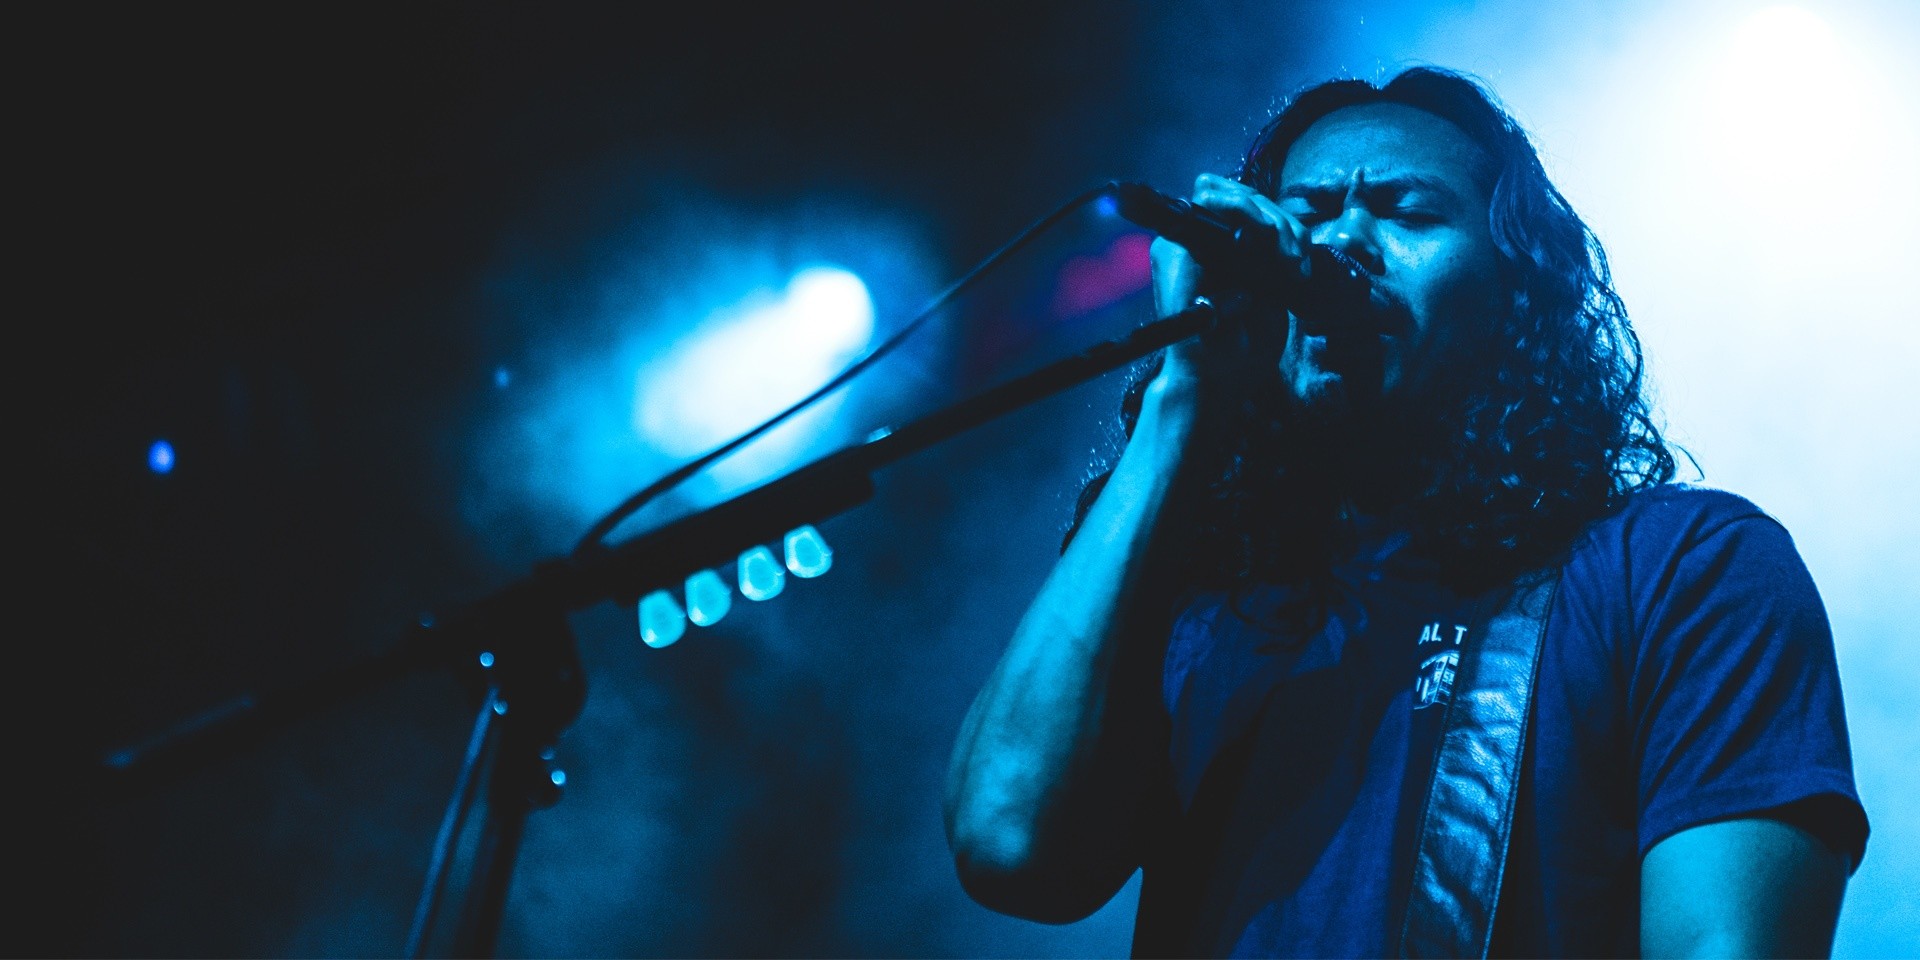 PHOTO GALLERY: The Temper Trap's glorious live return to Singapore